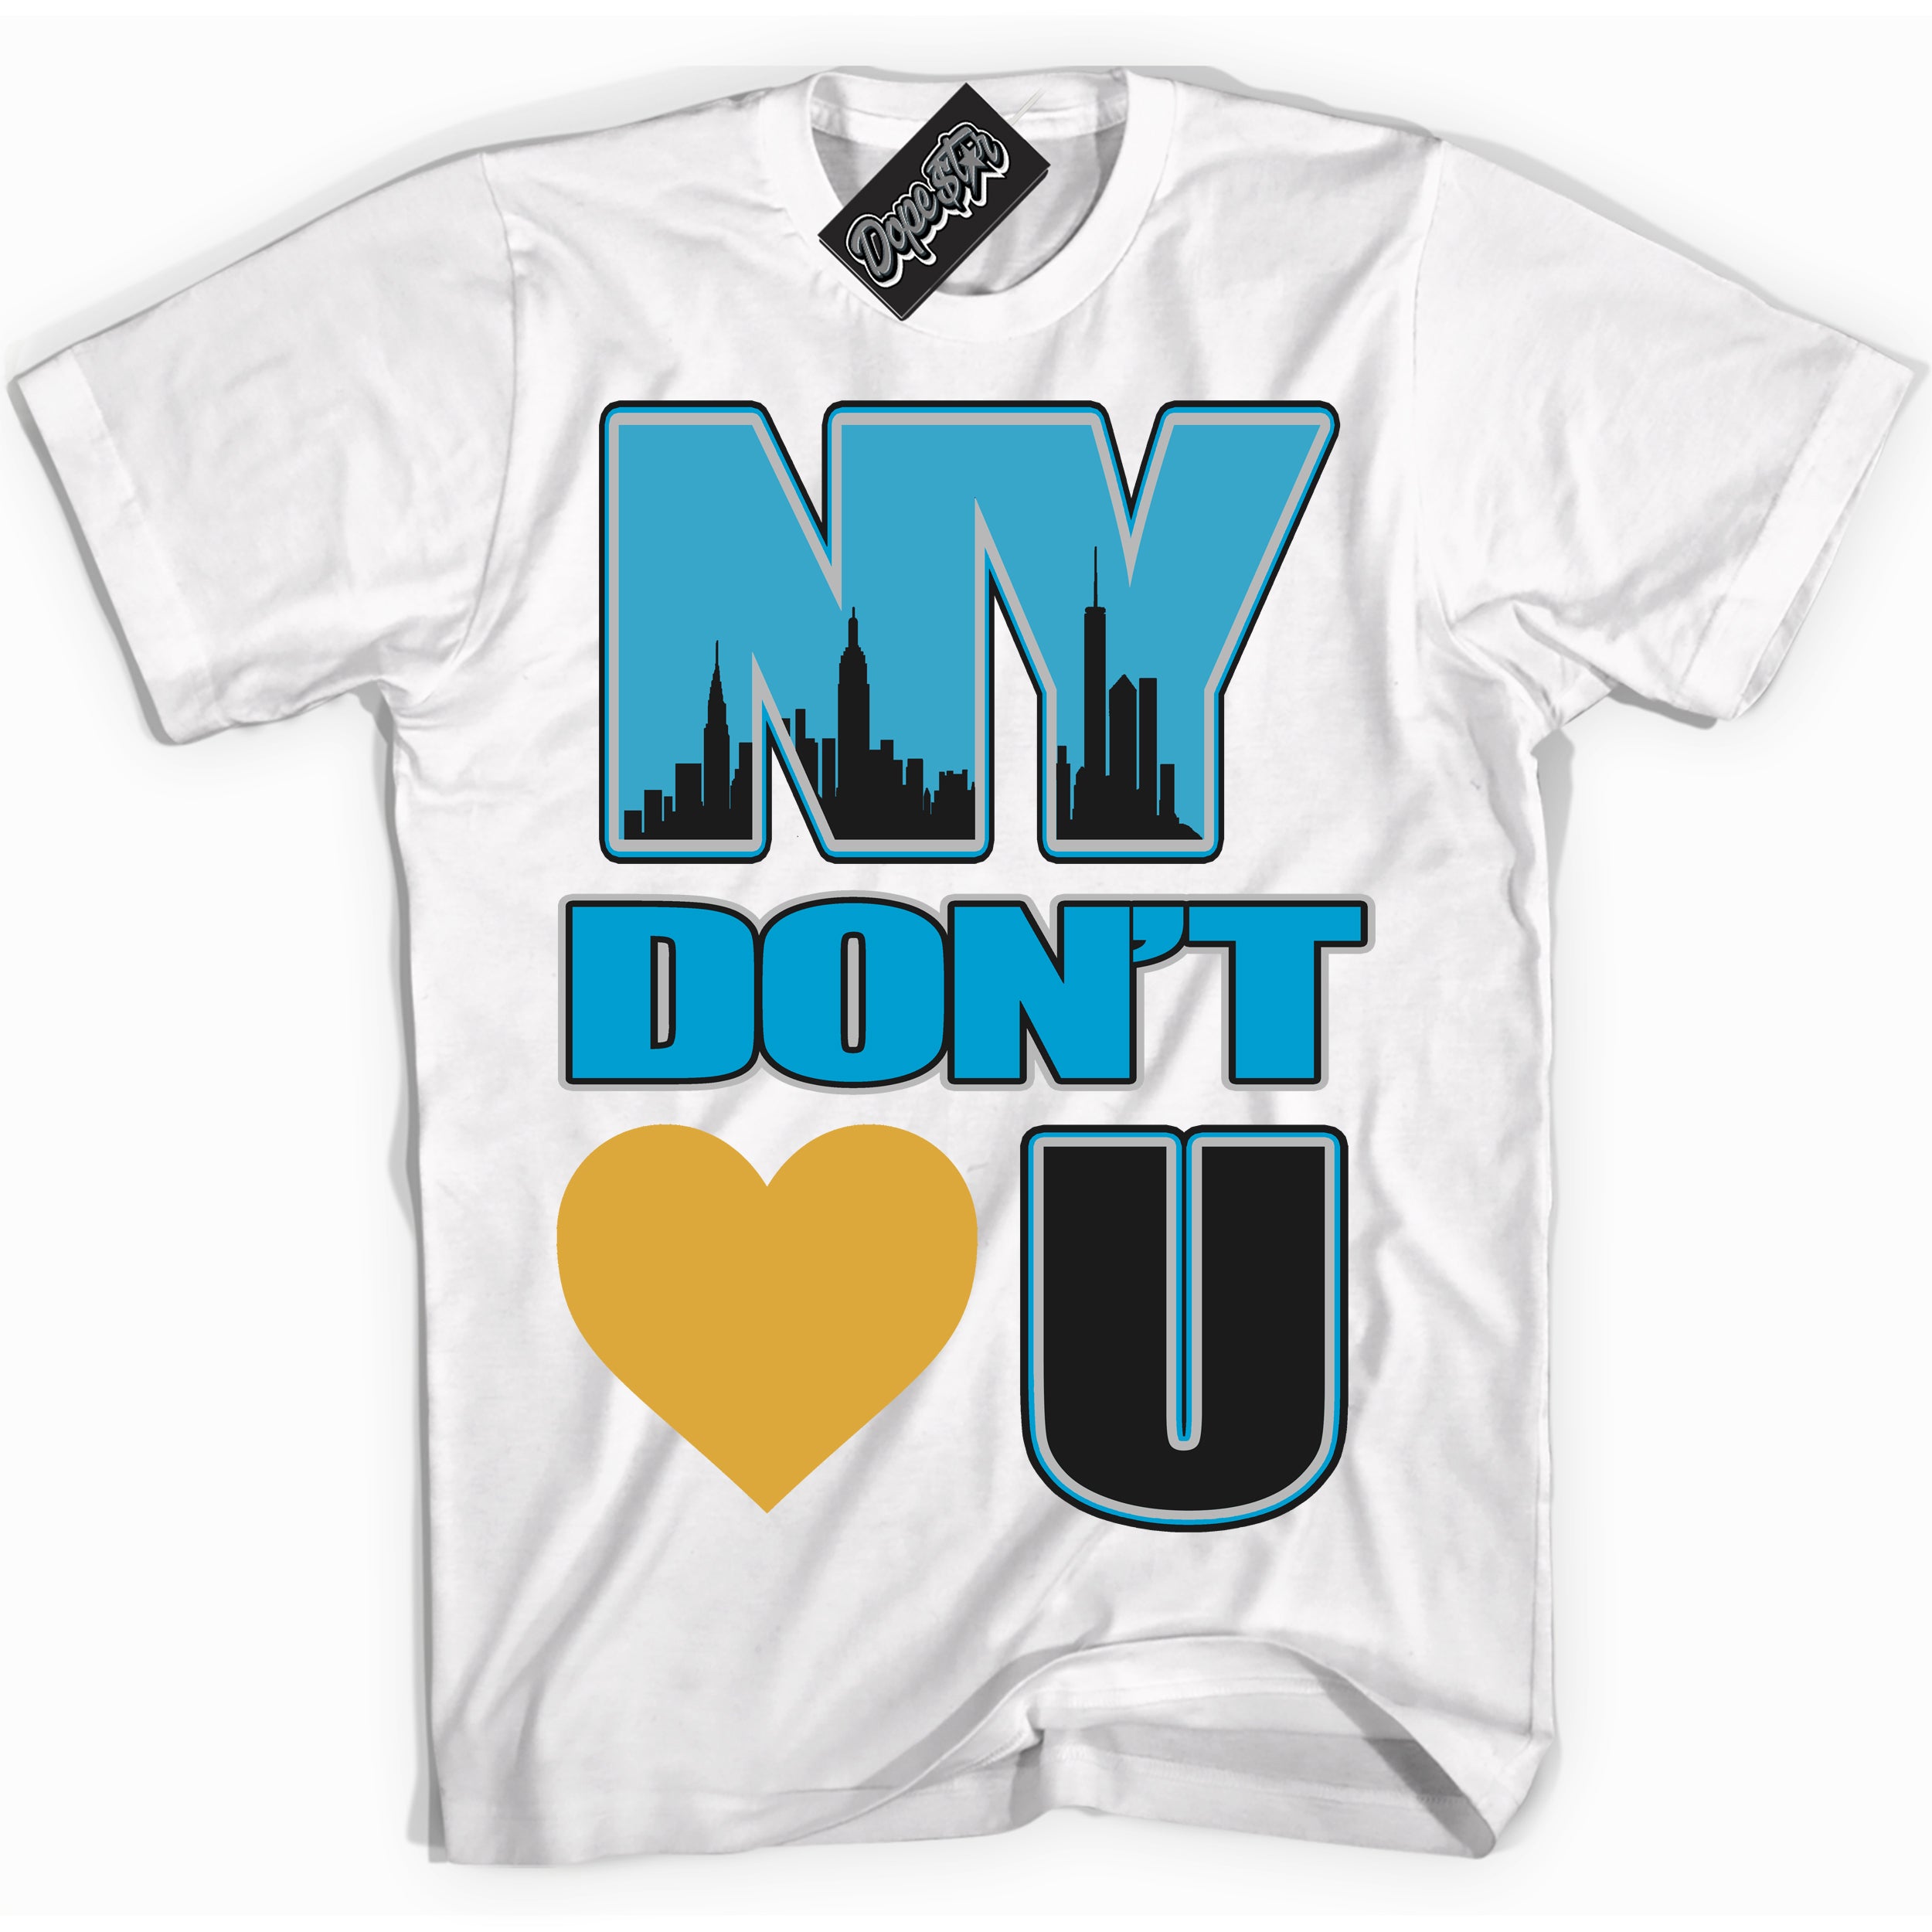 Cool White Shirt with “ NY Don't Love You” design that perfectly matches Aqua 5s Sneakers.